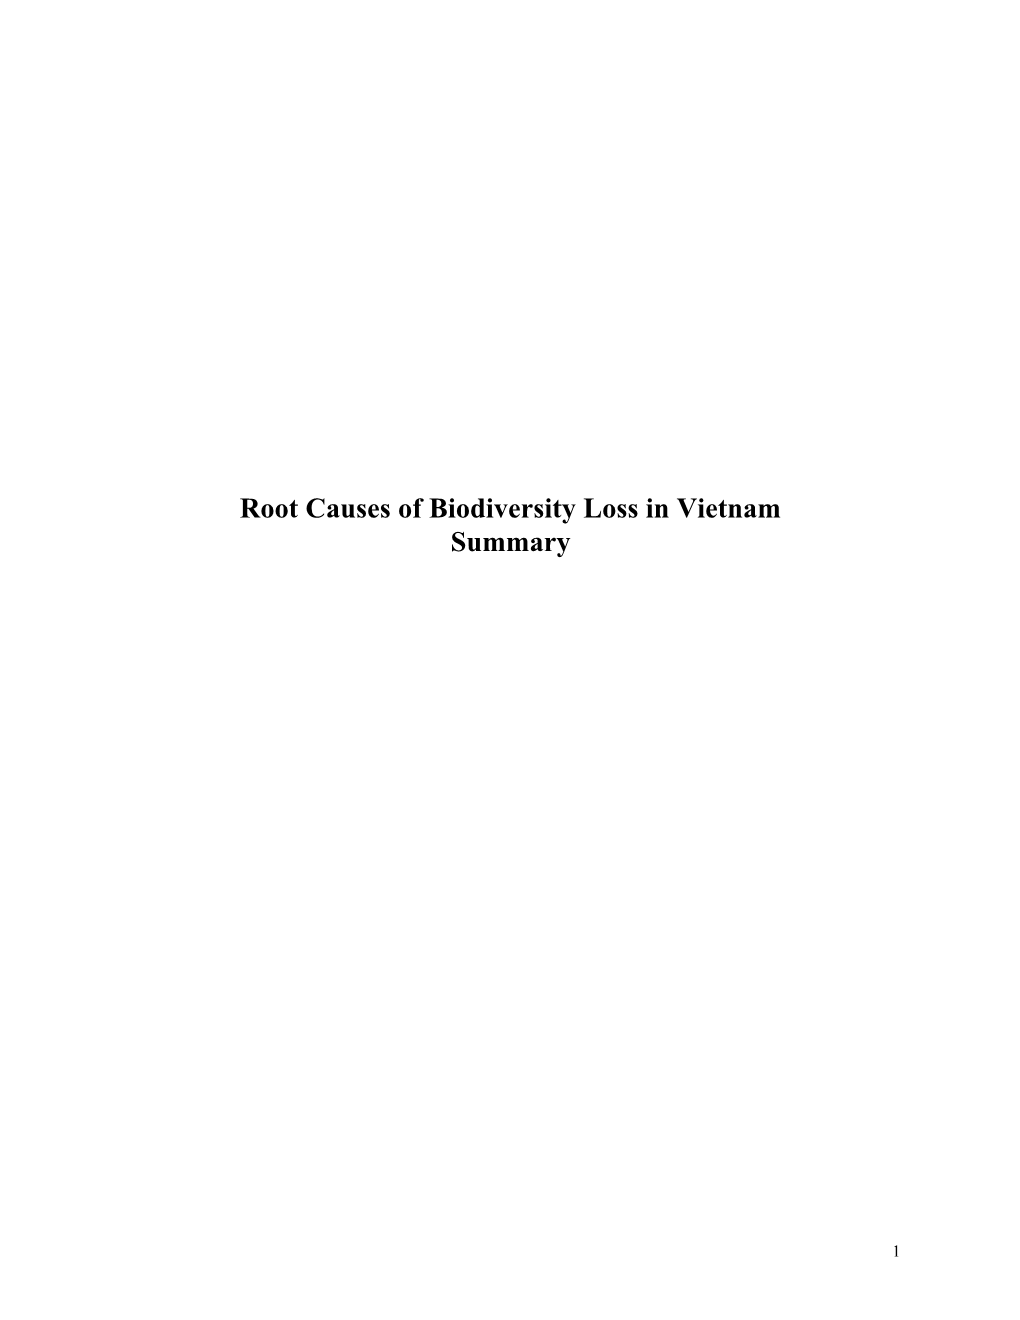 Root Causes of Biodiversity Loss in Vietnam Summary